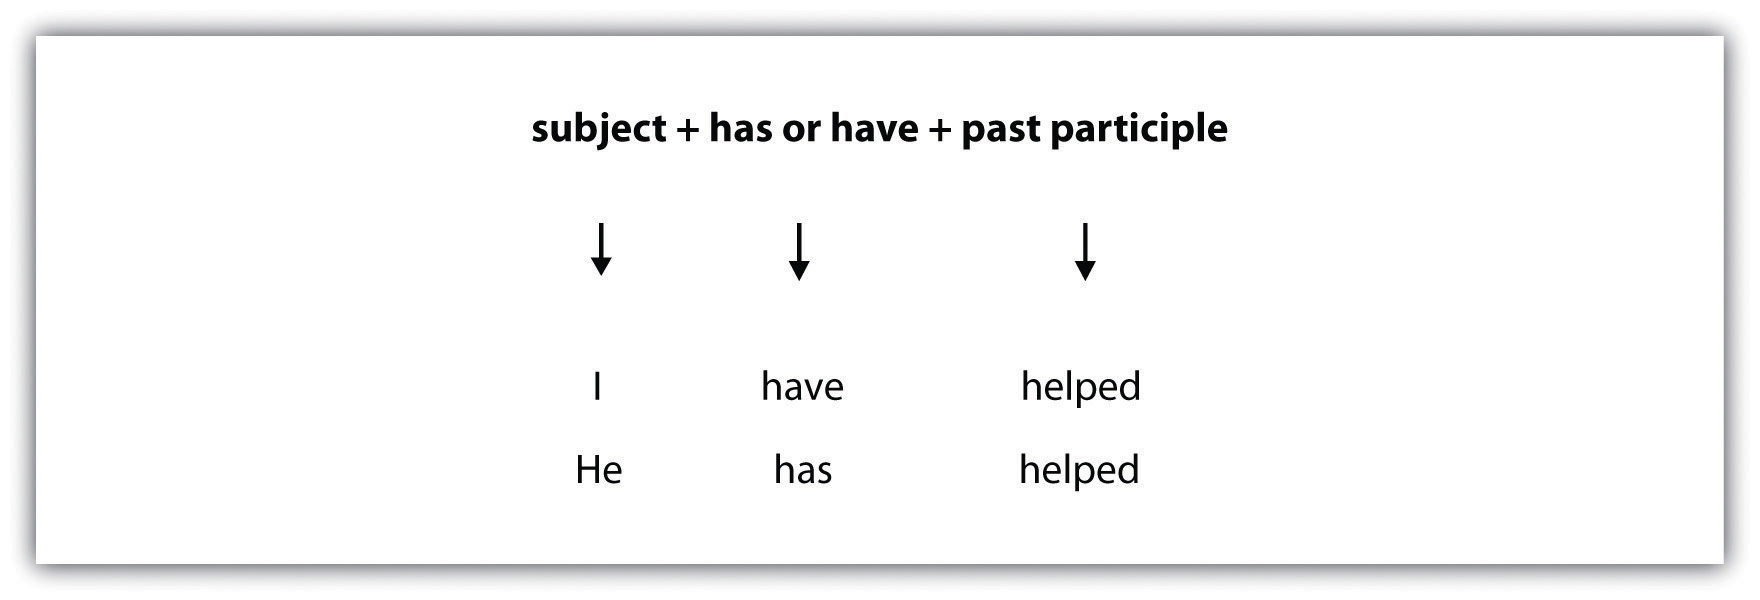 Subject (I and He), has or have (have and has), past participle (helped and helped)